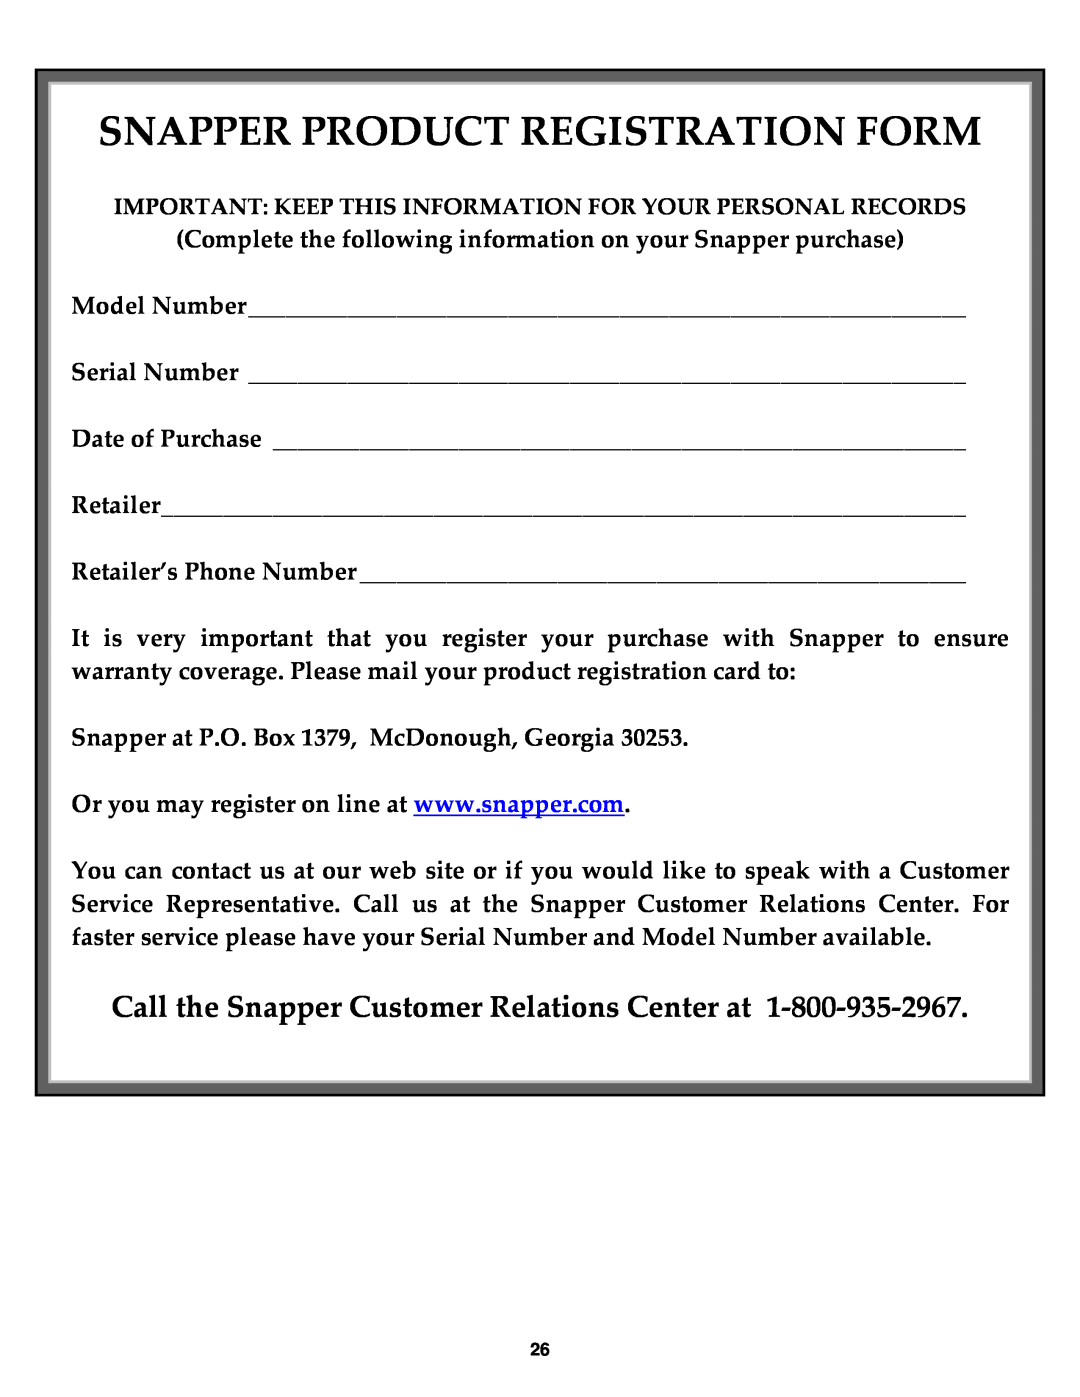 Snapper SGV13321KW Snapper Product Registration Form, Call the Snapper Customer Relations Center at 